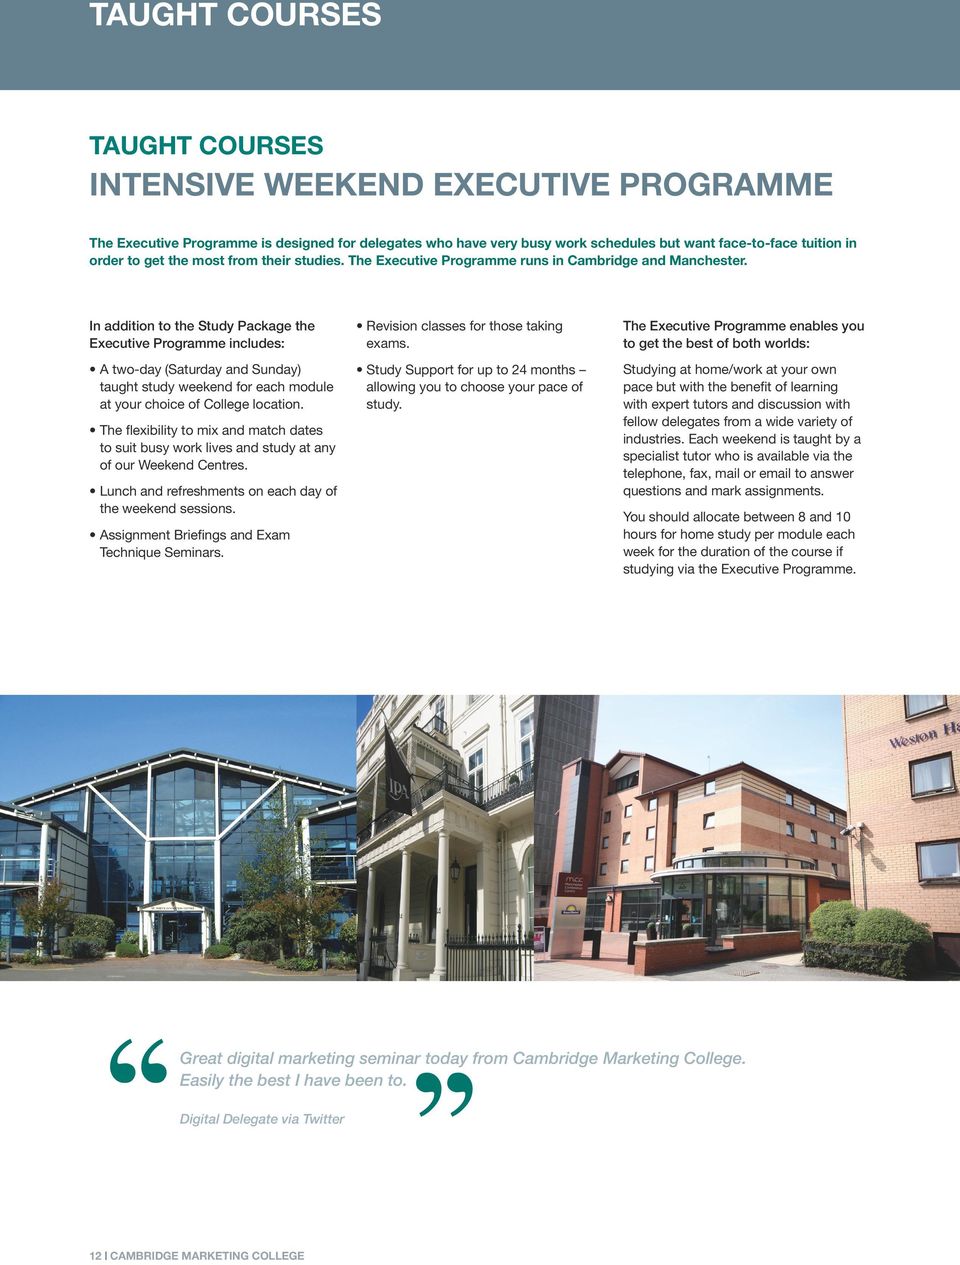 The Executive Programme enables you to get the best of both worlds: A two-day (Saturday and Sunday) taught study weekend for each module at your choice of College location.